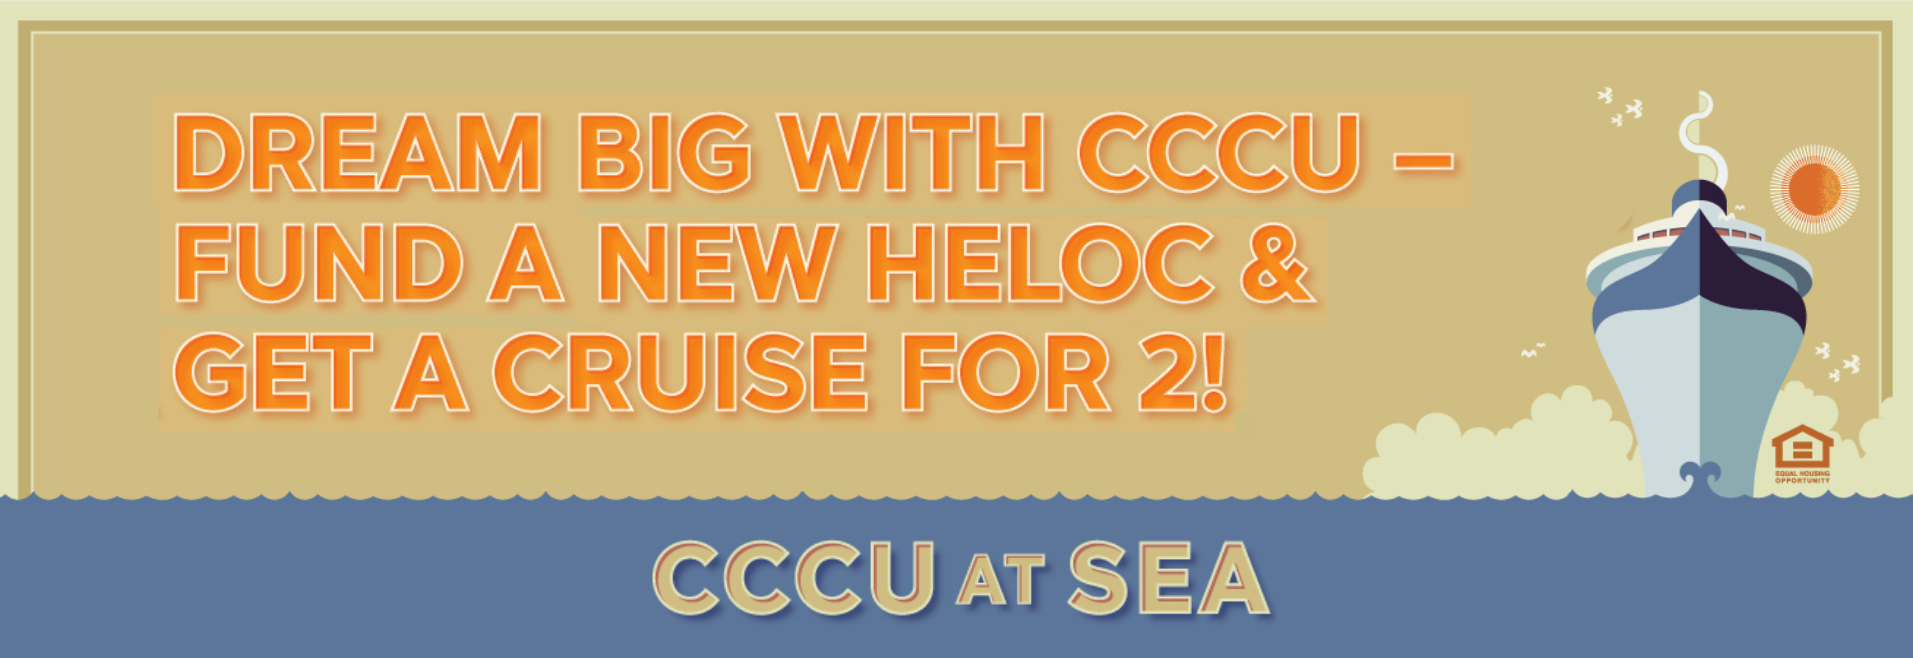 Fund a new HELOC & get a cruise for 2!